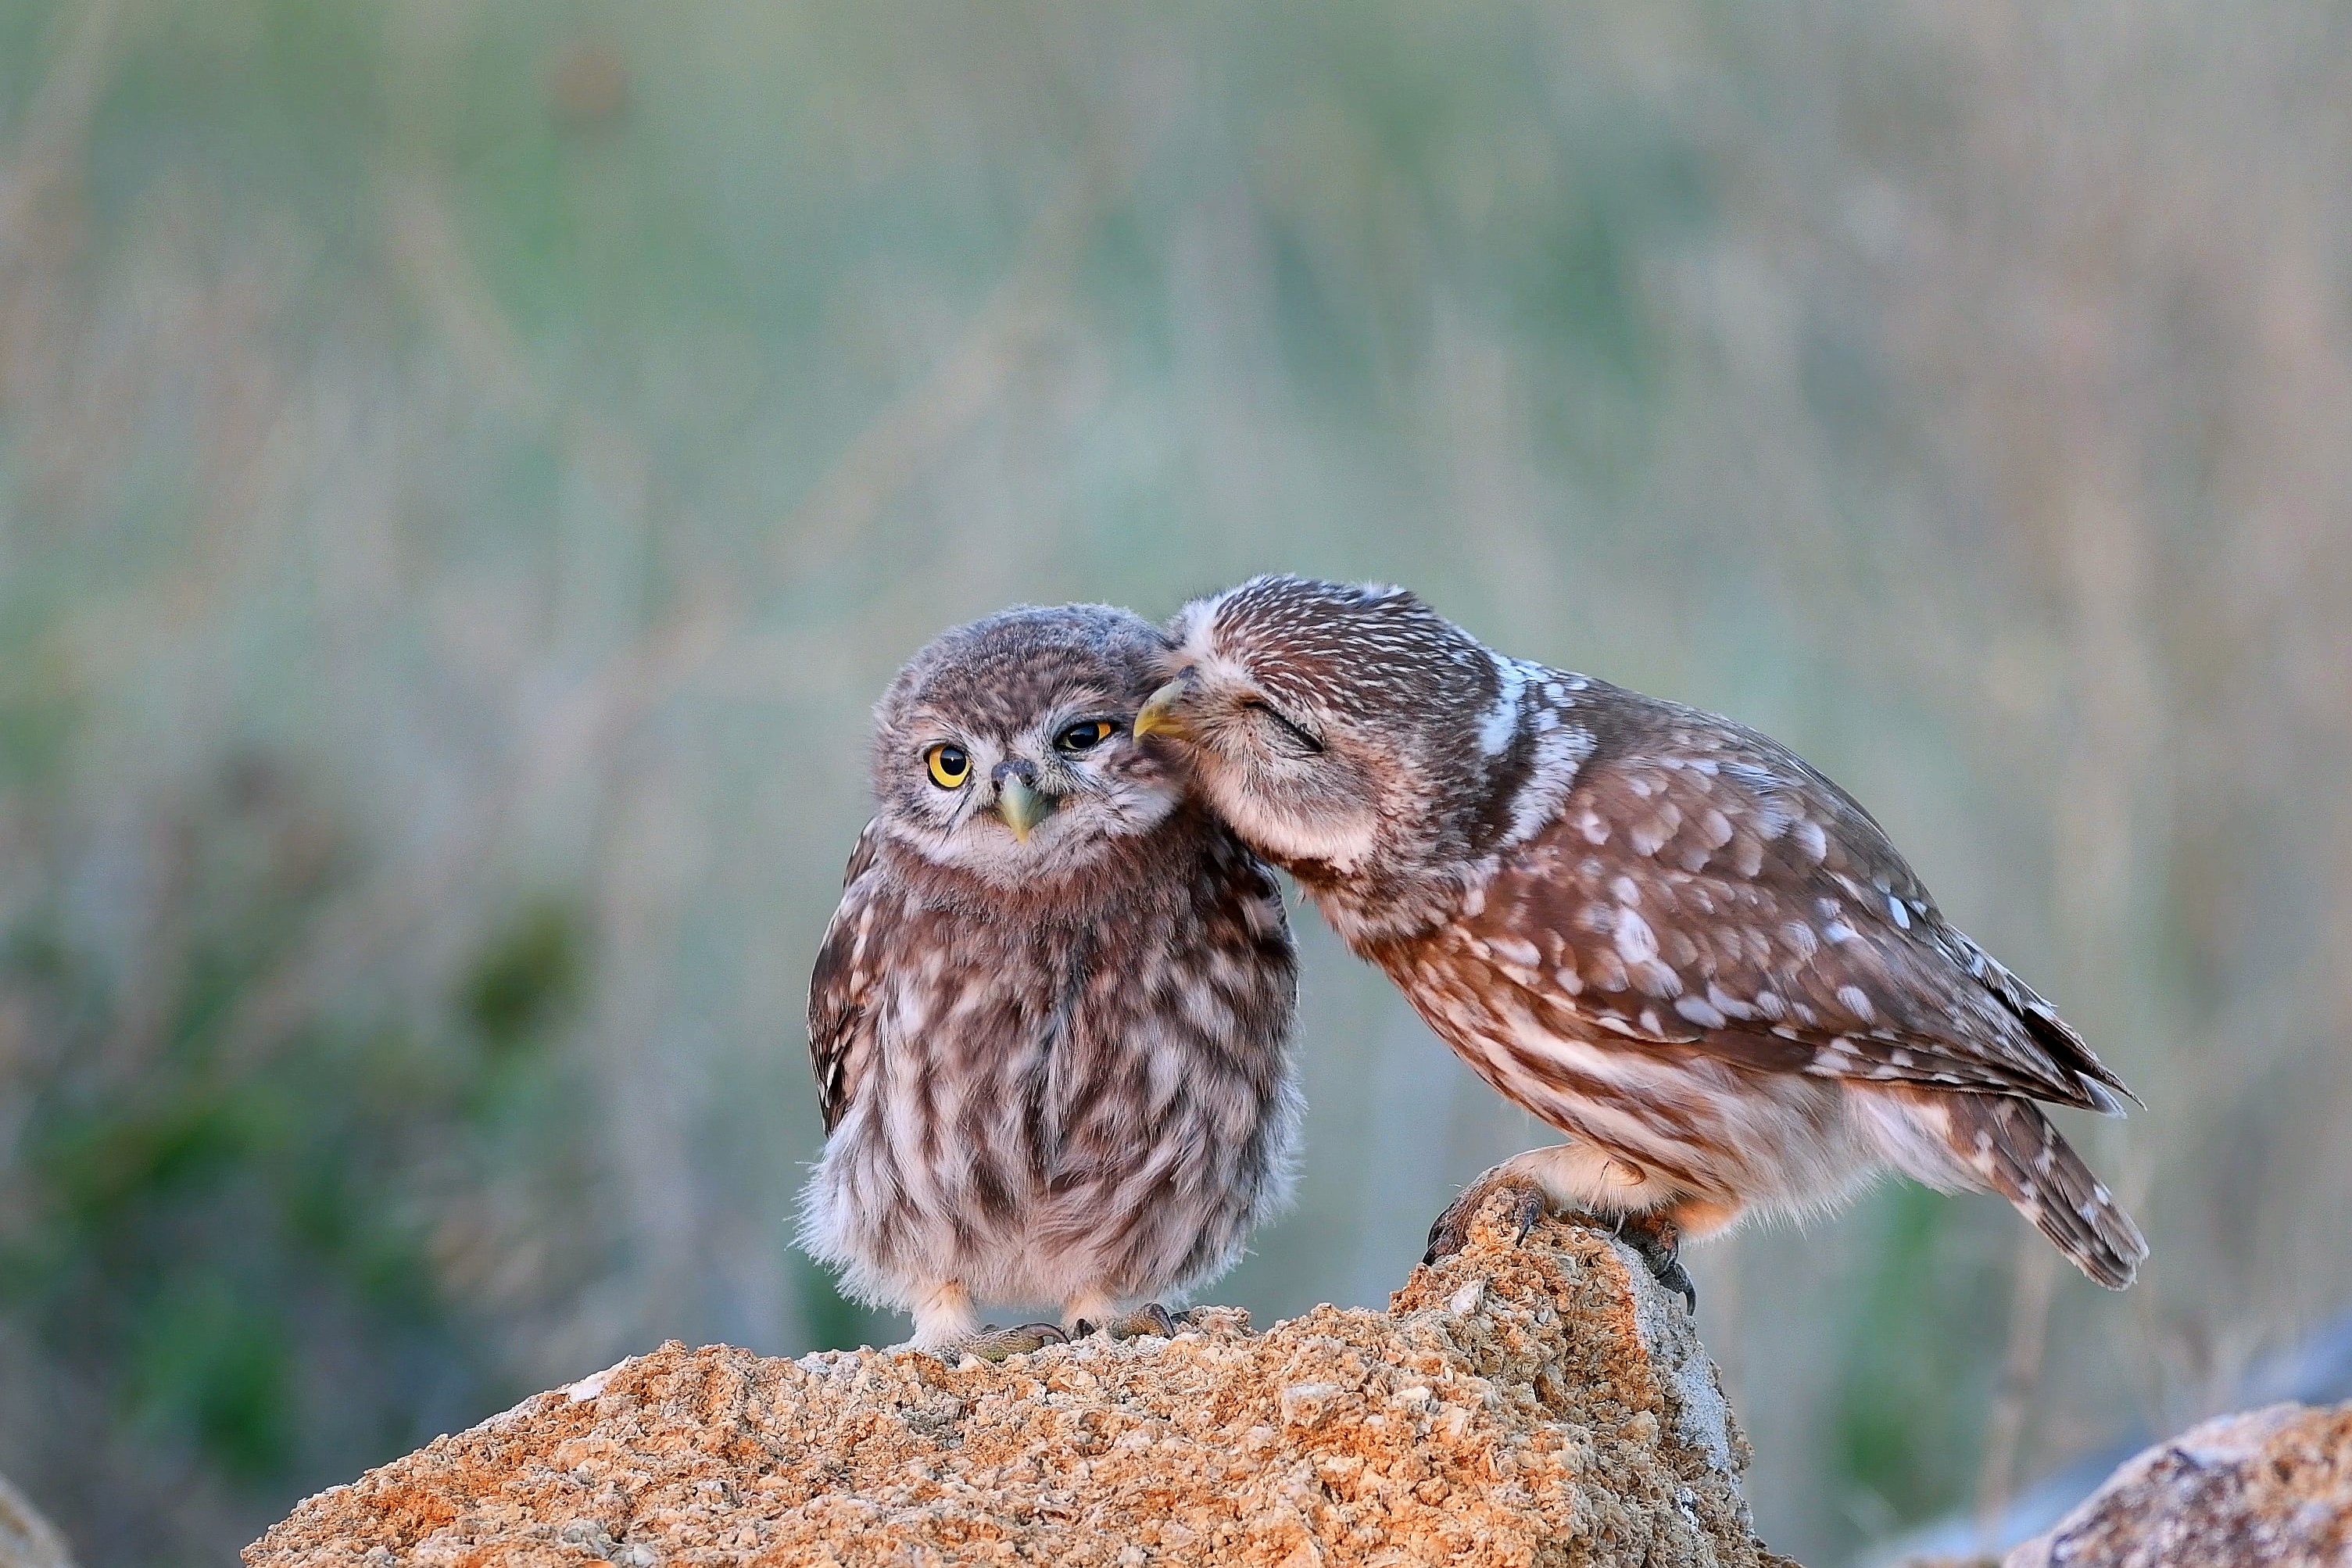 The little owl (Athene noctua) with his chick standing on a stone.